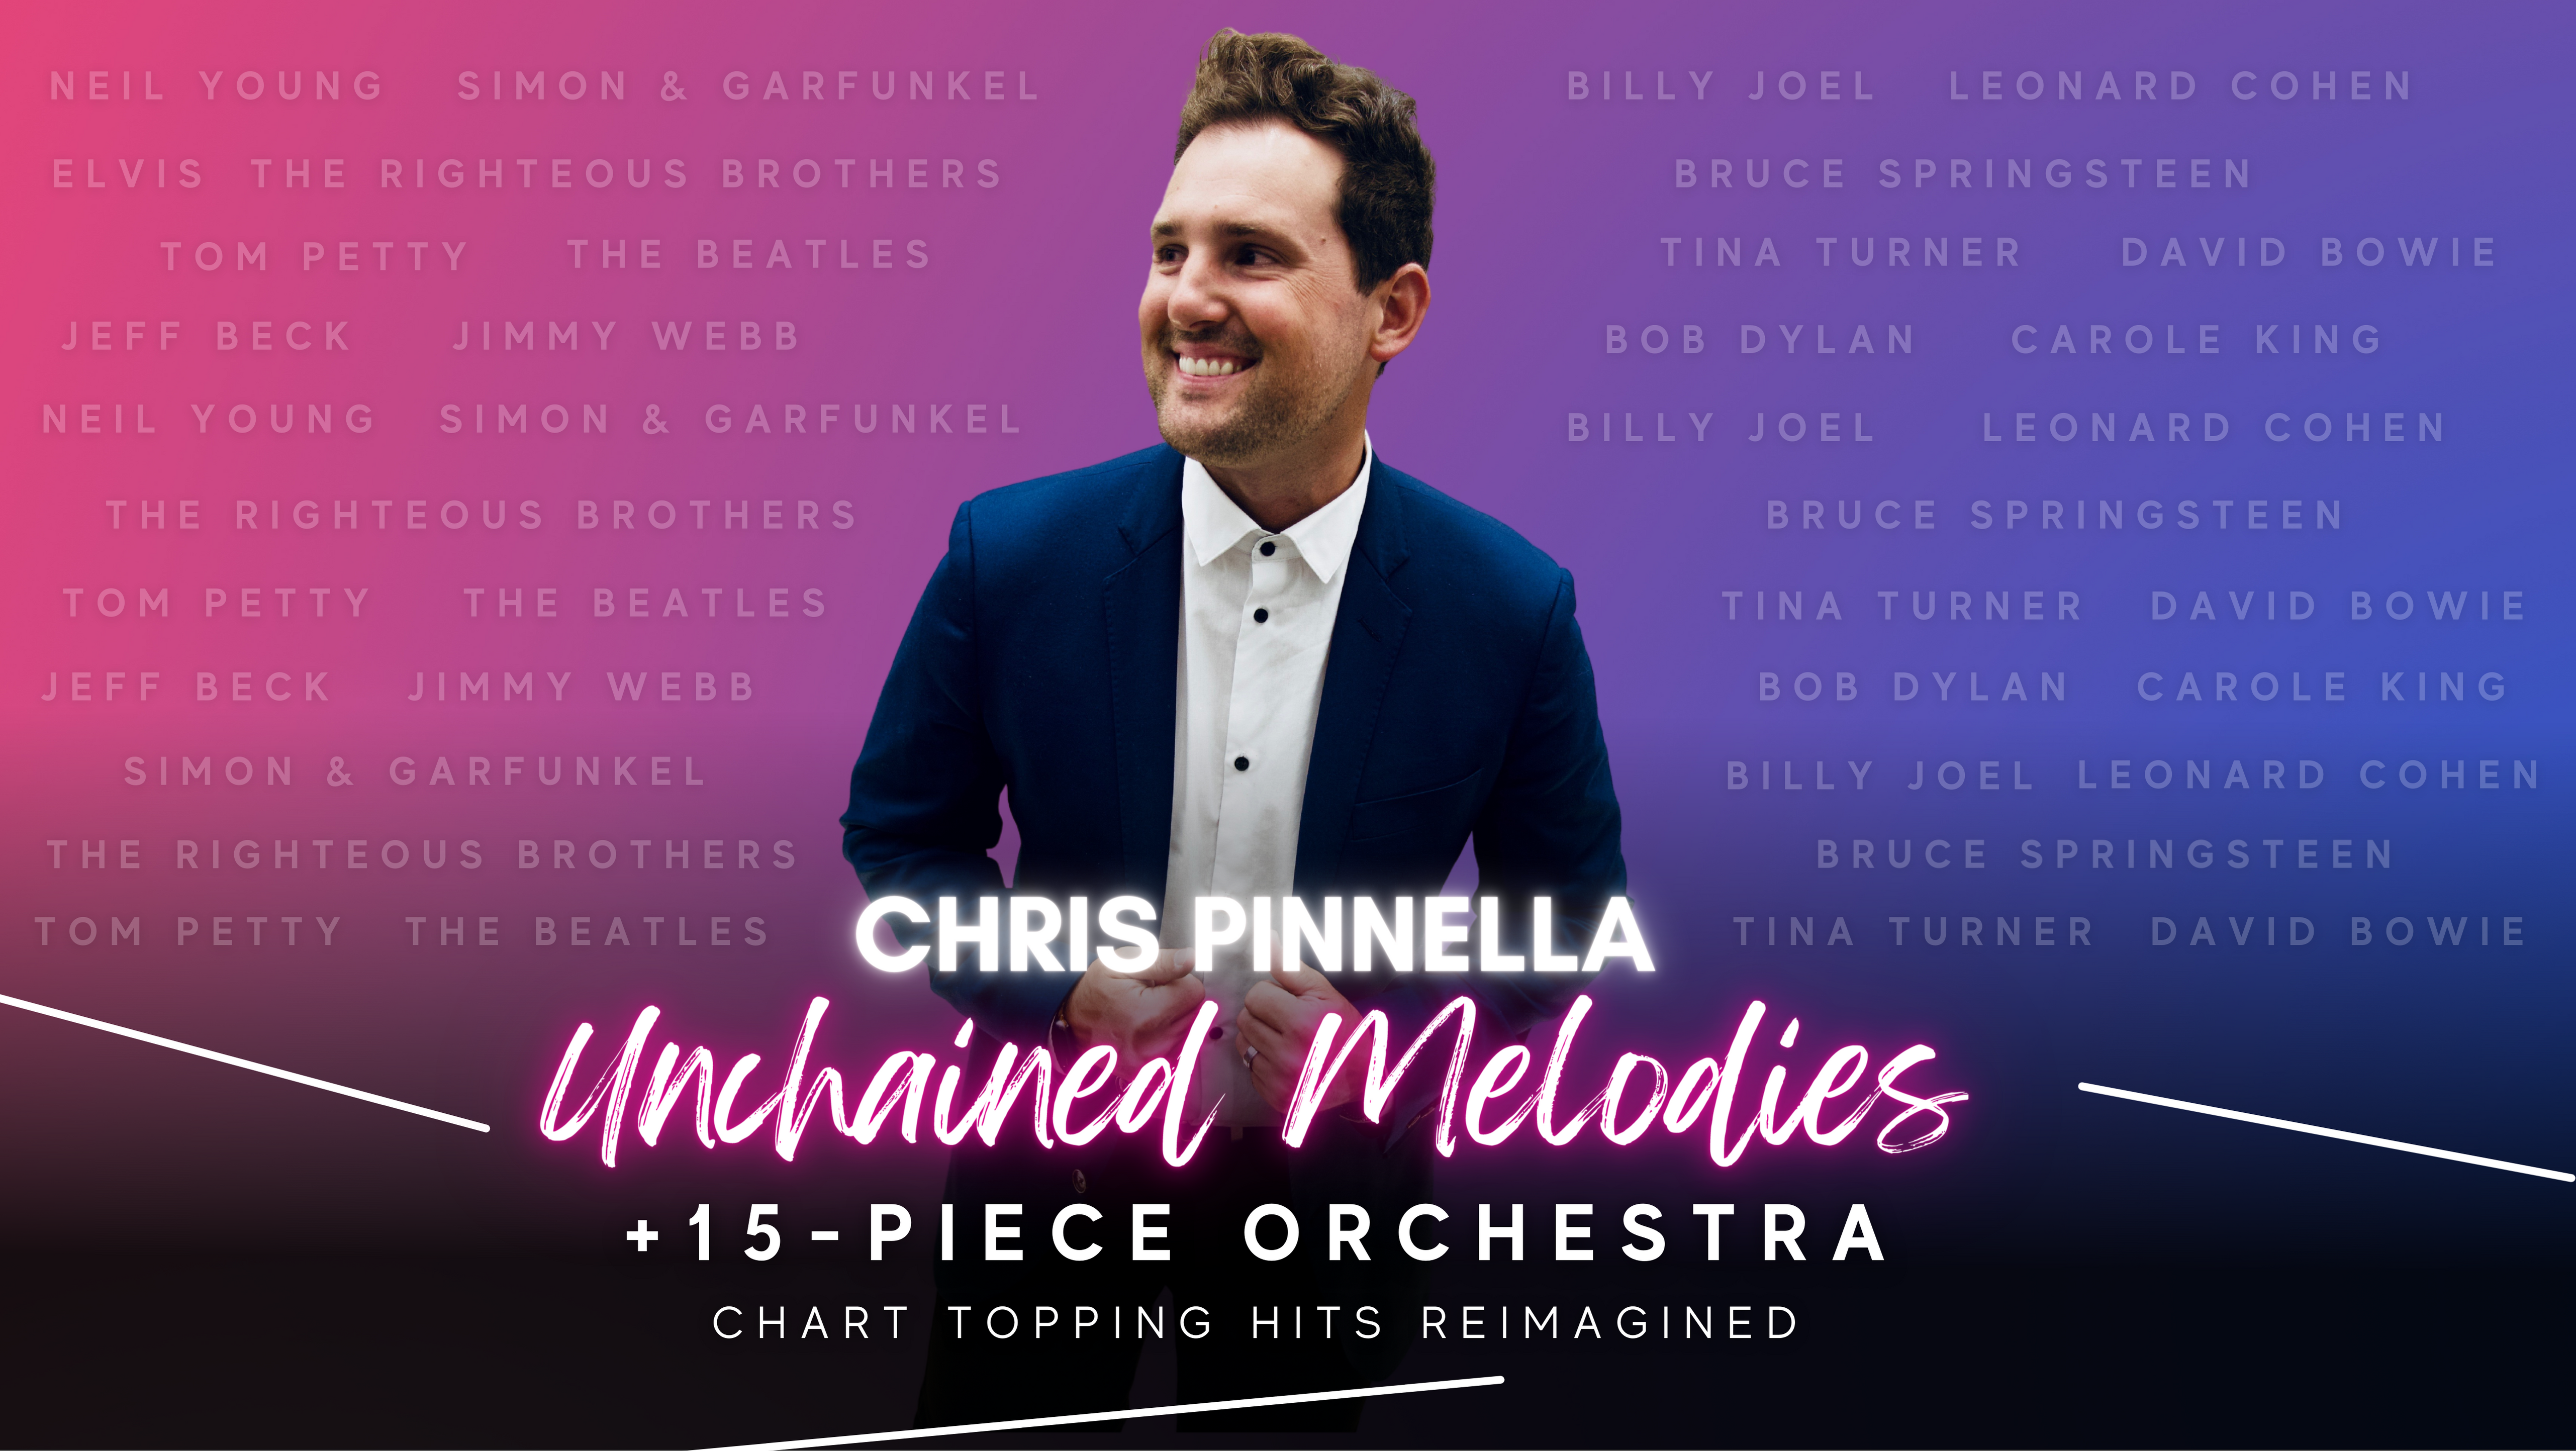 Chris Pinnella's Unchained Melodies